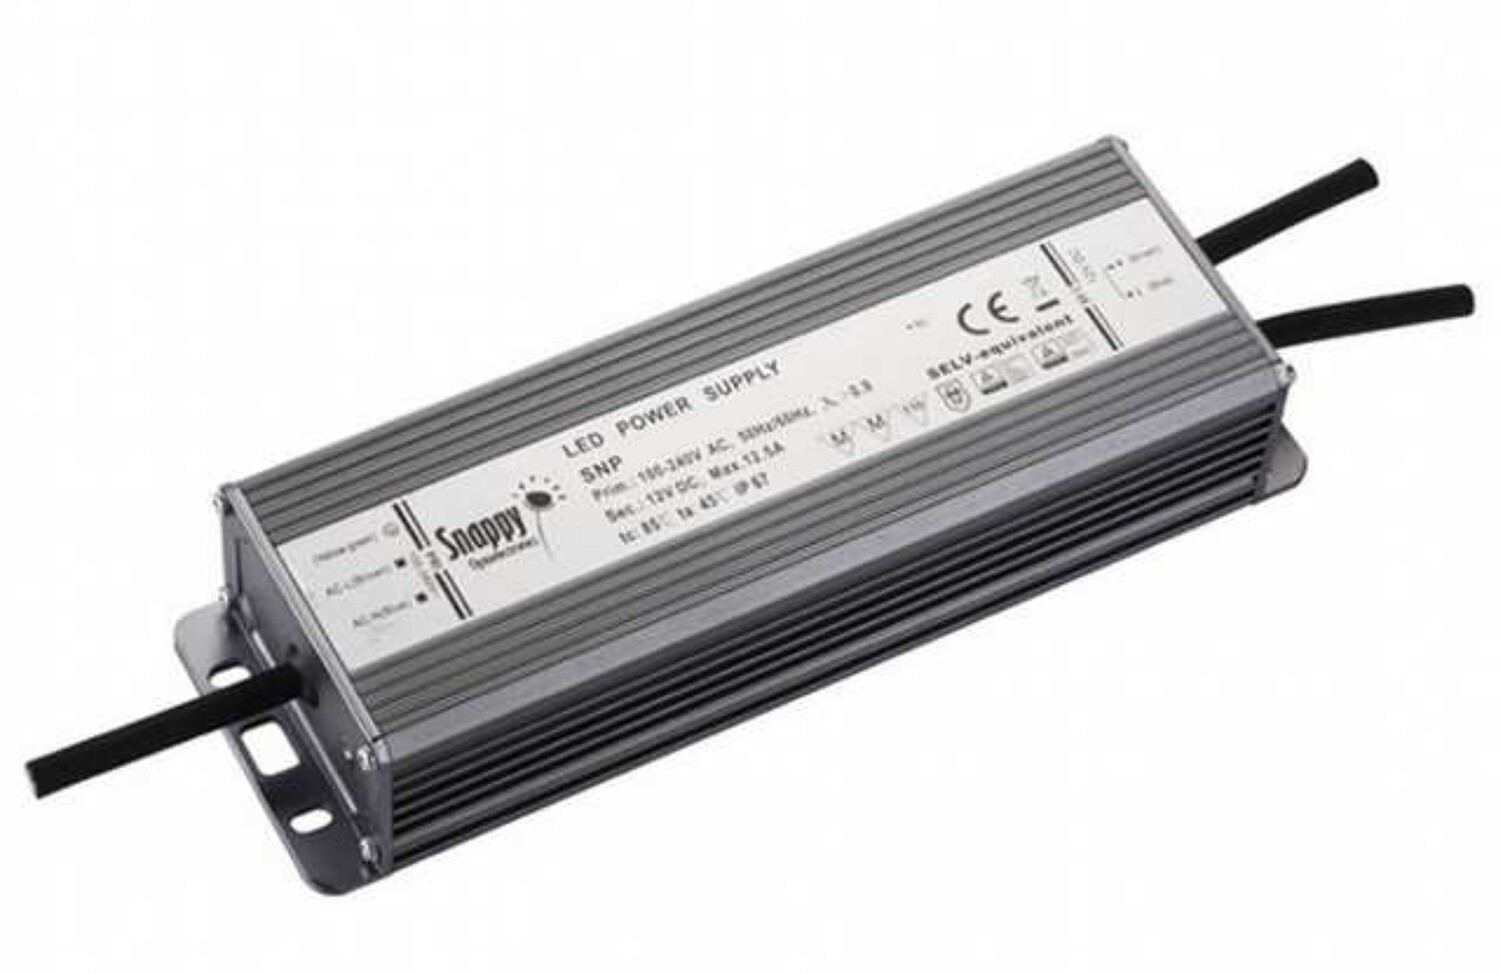 SPE 320W, Constant Voltage Non Dimmable Aluminum LED Driver, 24VDC,IP67